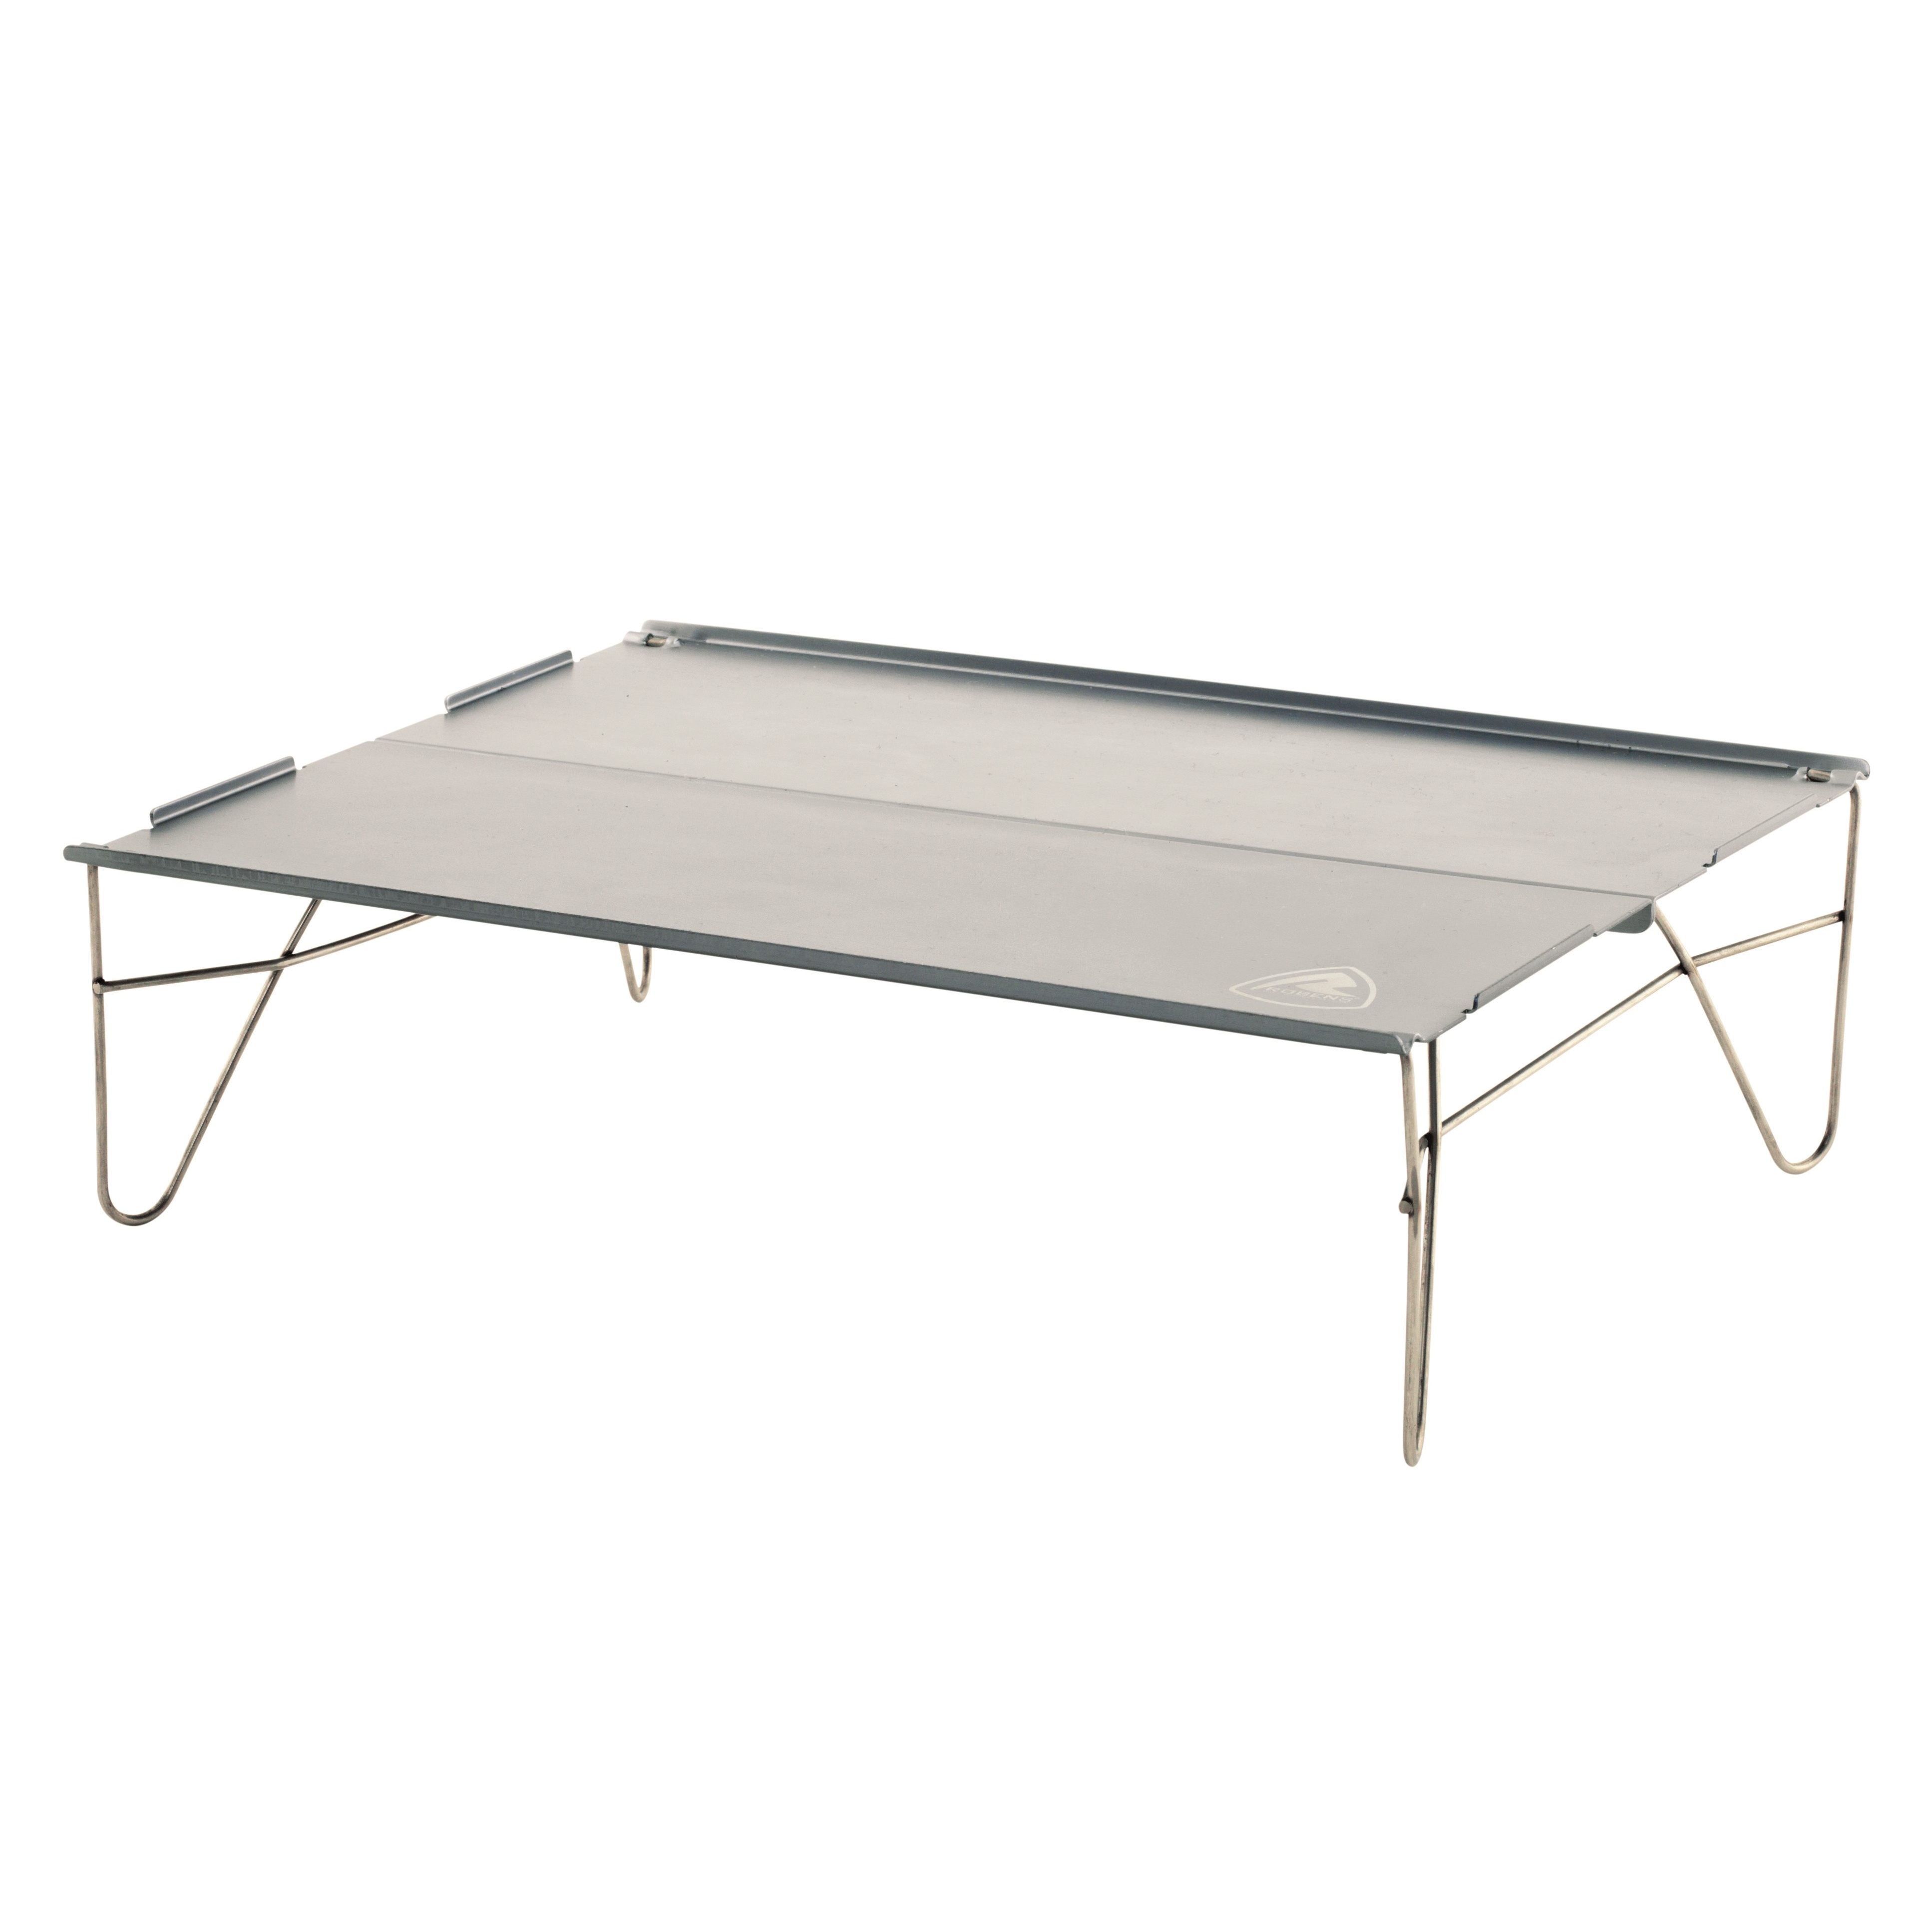 Robens Wilderness Cooking Table Silver